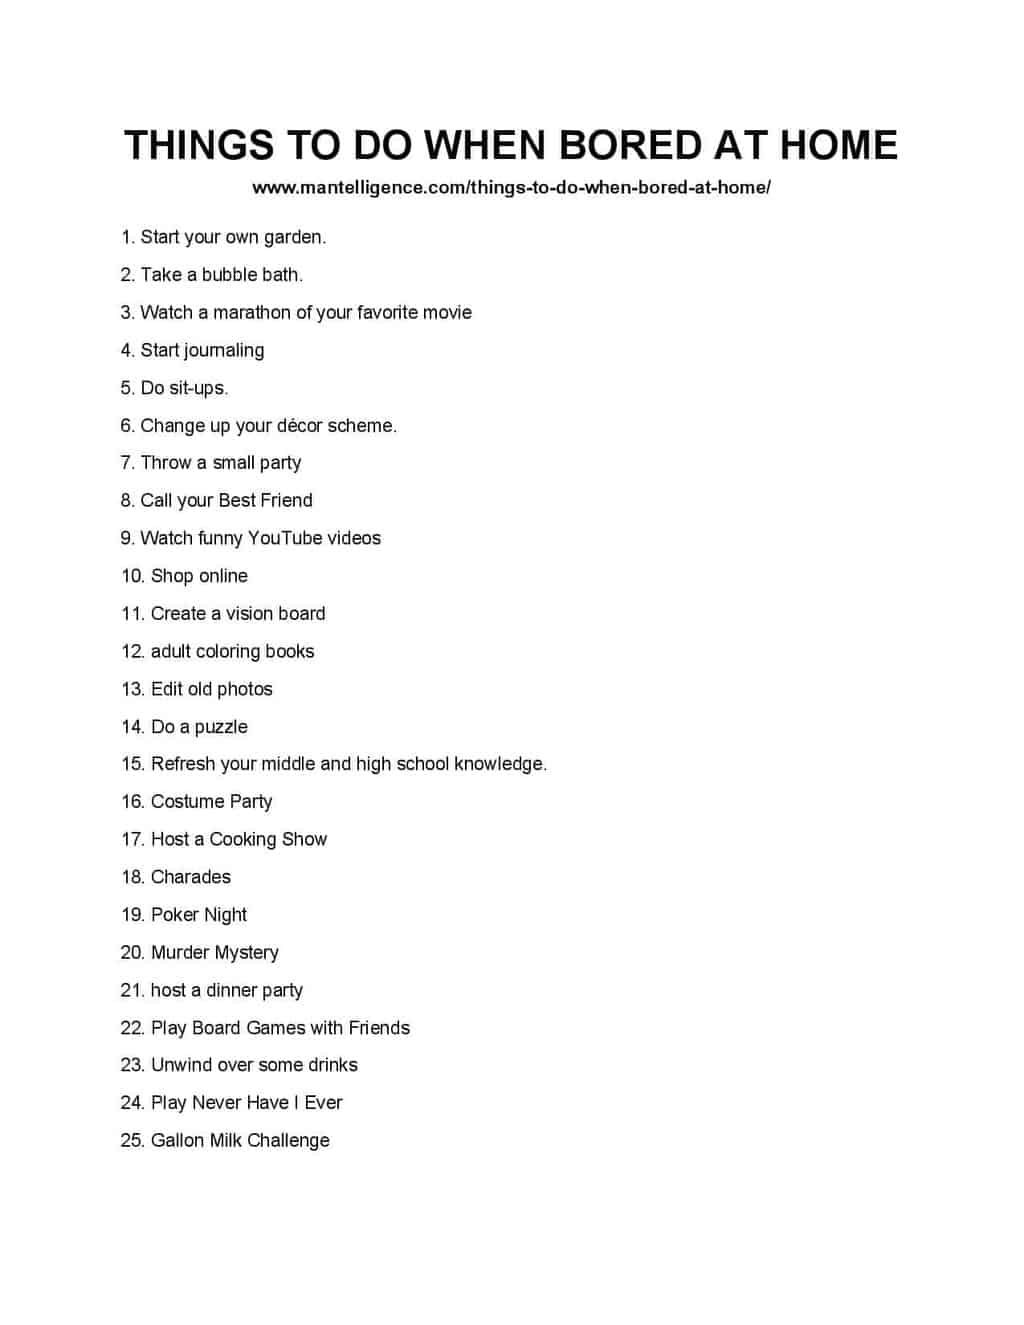 96 Things To Do When Bored At Home - Fun activities to do!